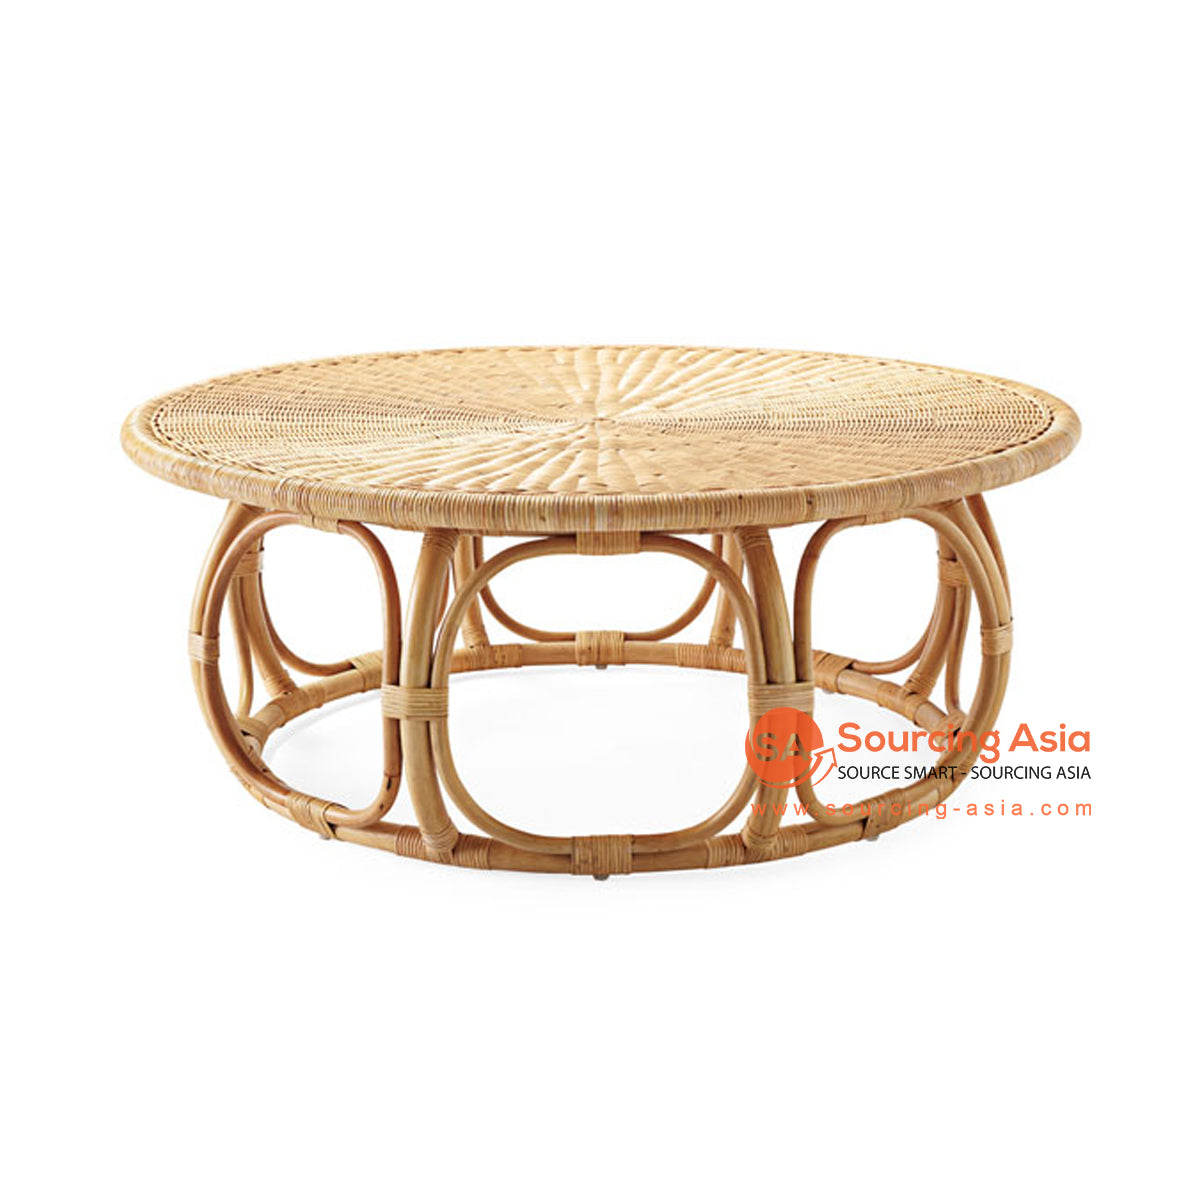 Shl200 1 Natural Woven Rattan Round Coffee Table Sourcing Asia